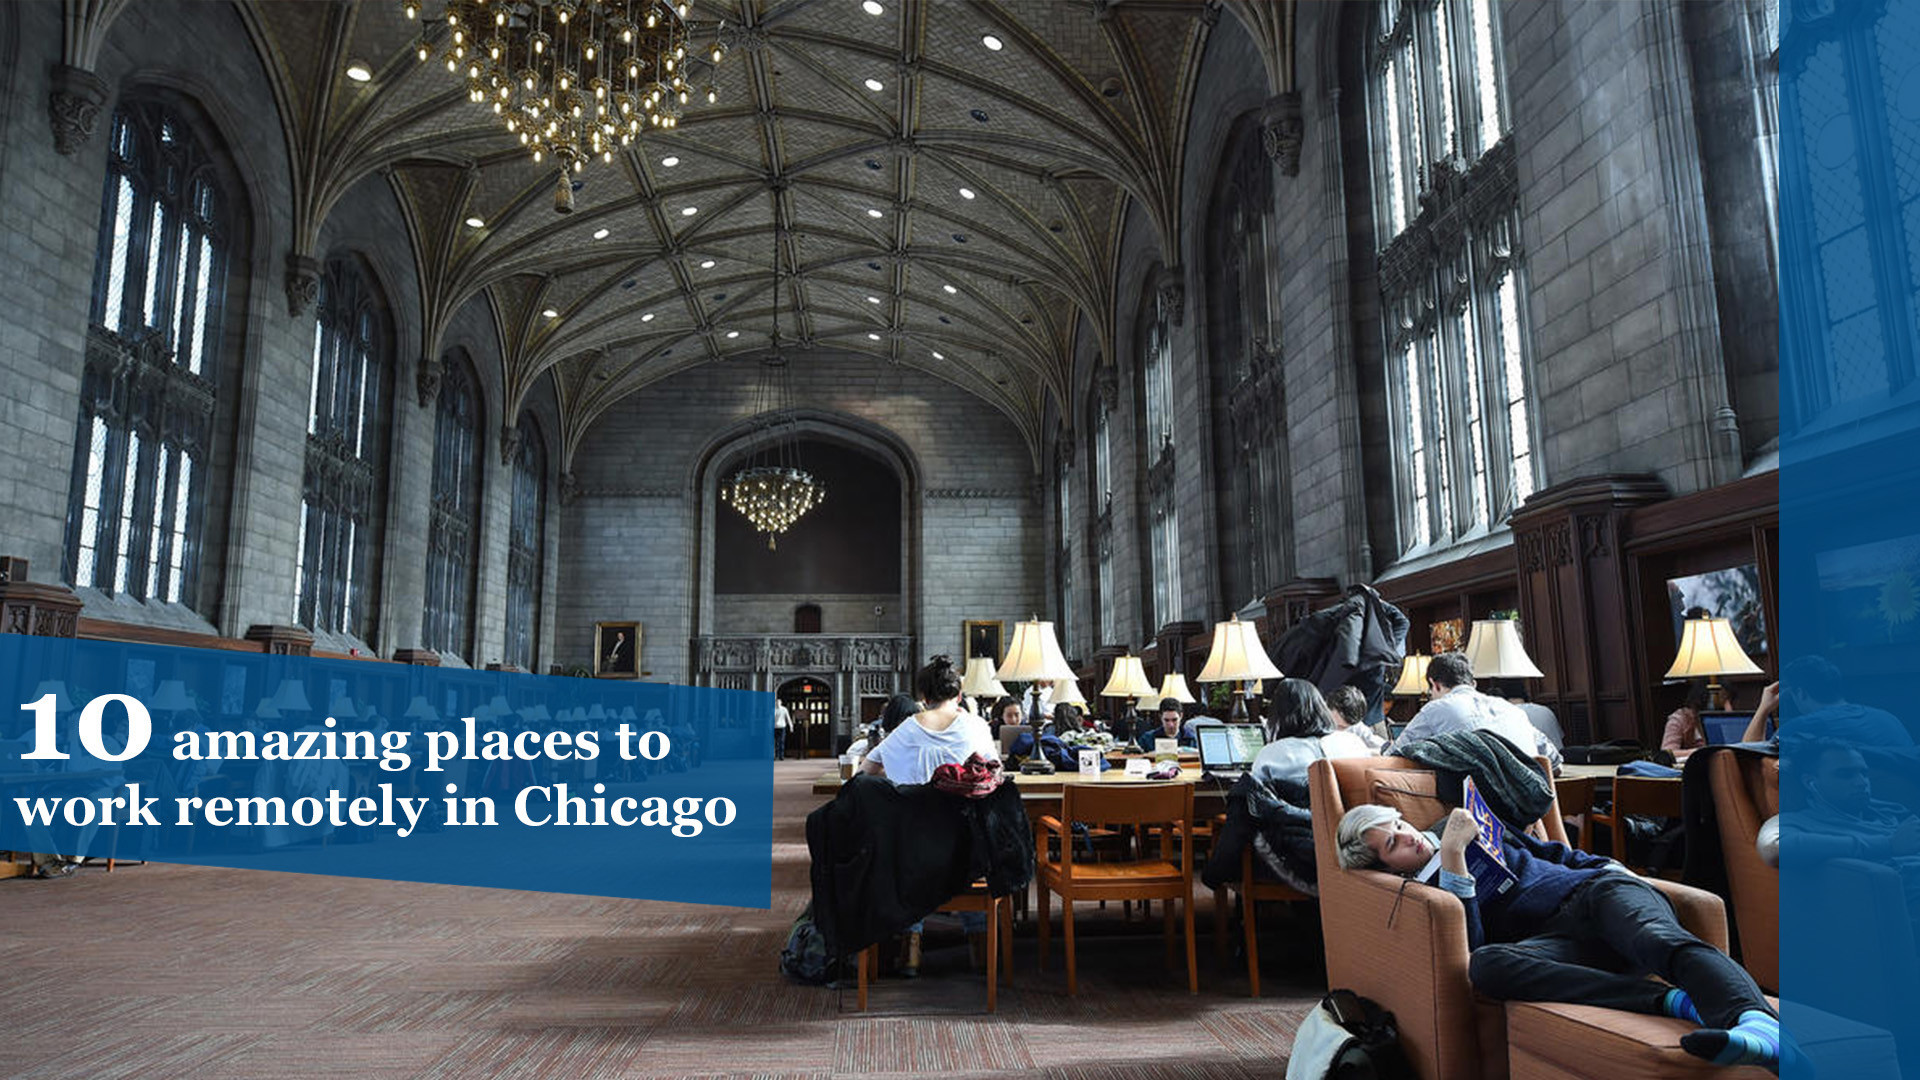 10 amazing places to work remotely in Chicago - Chicago Tribune